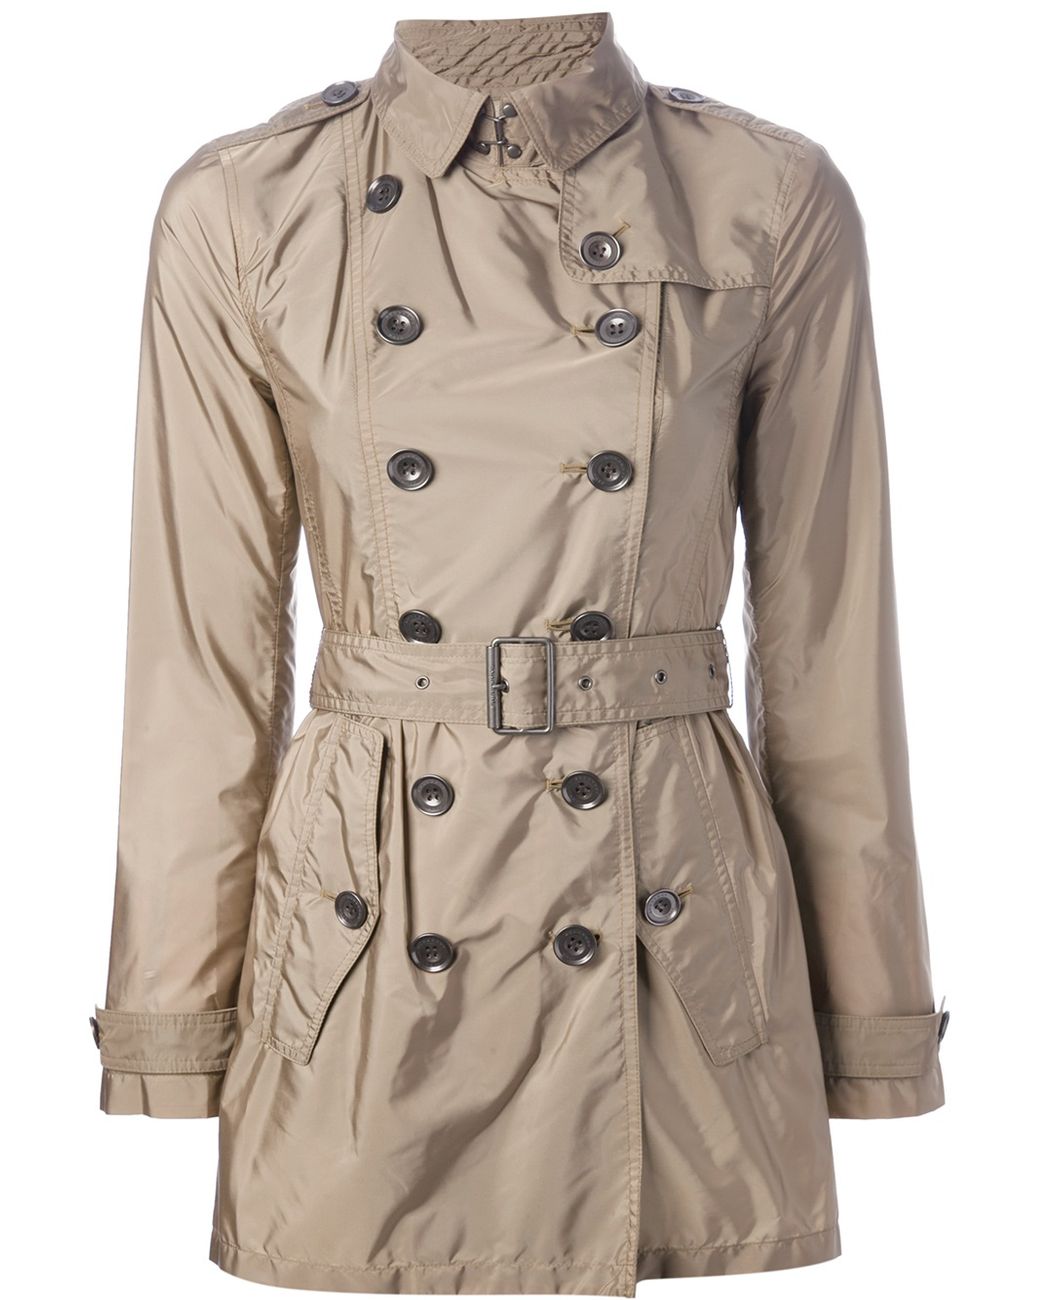 vil gøre parade Potentiel Burberry Brit Lightweight Trench Coat in Natural | Lyst